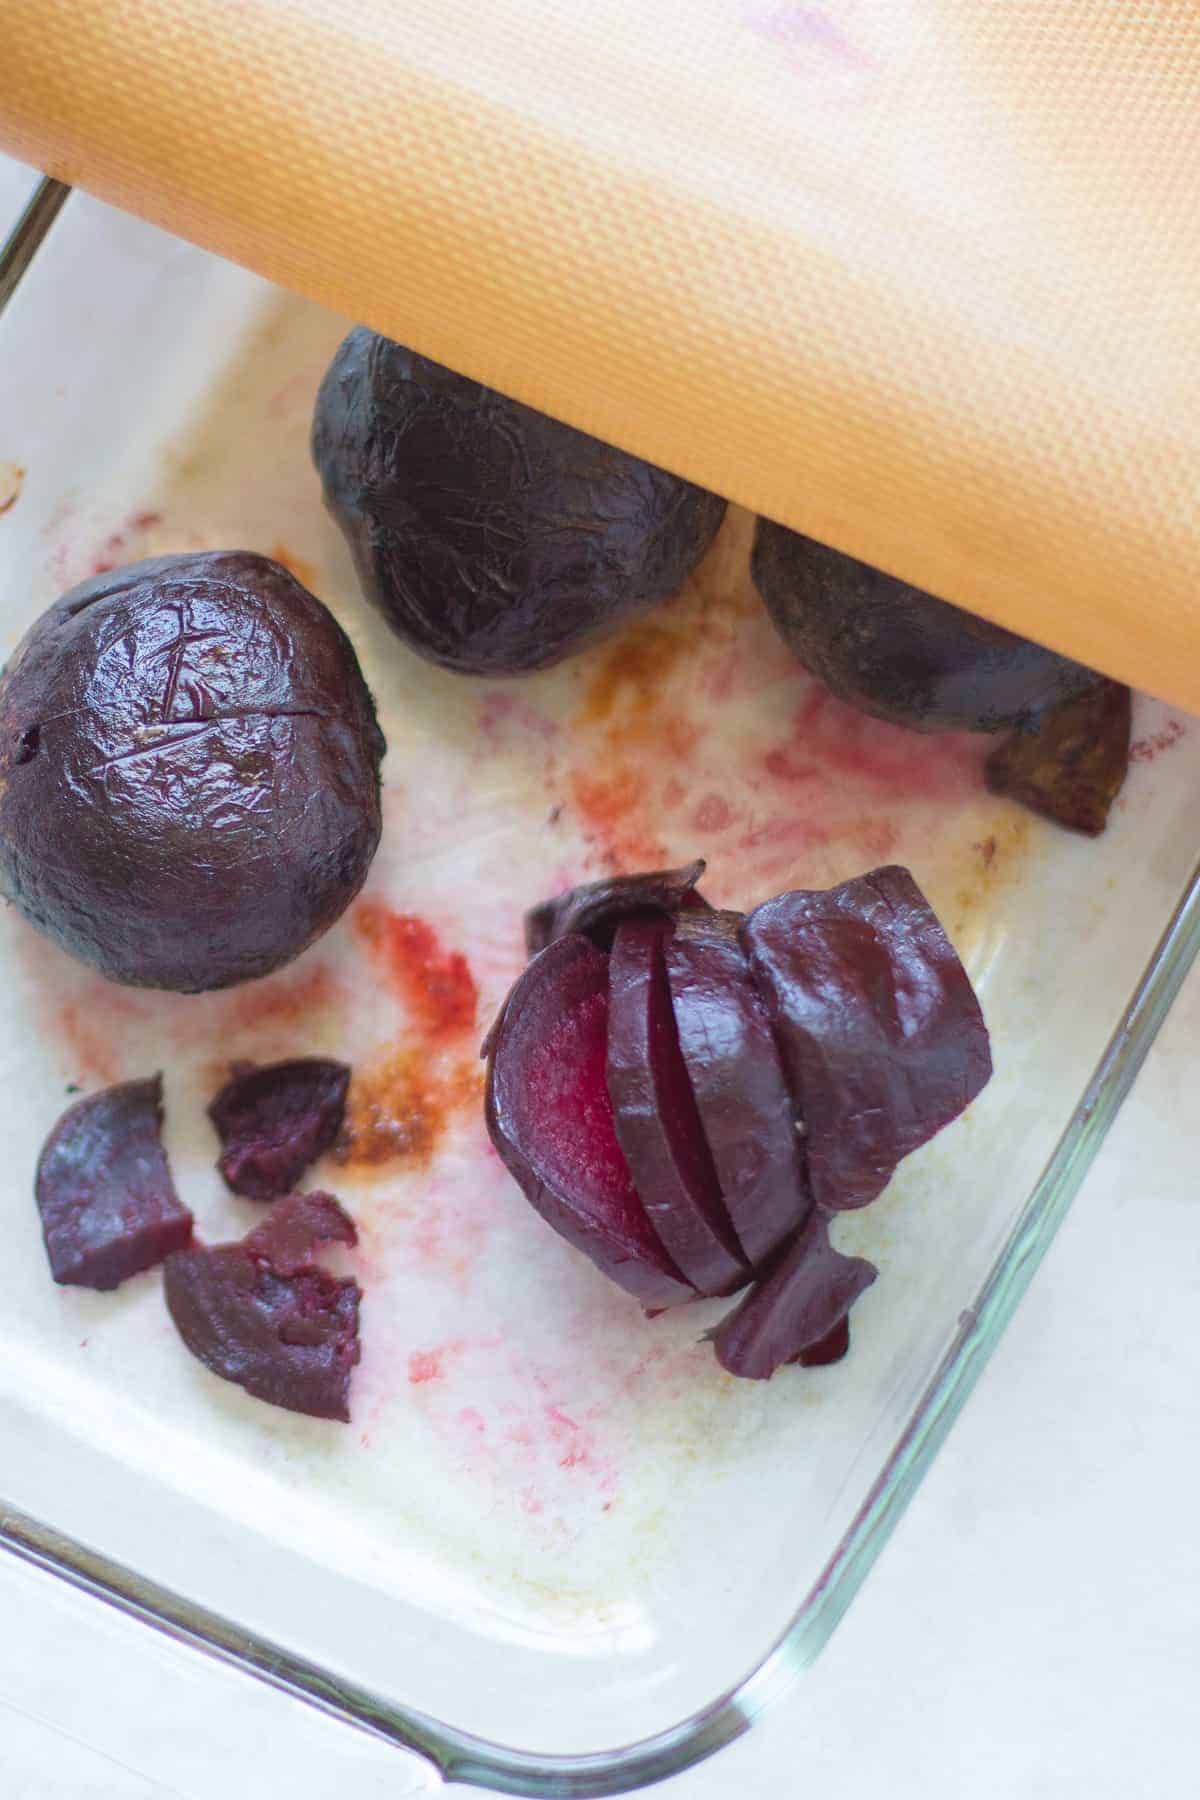 beetroot steam roasted in a glass pan.